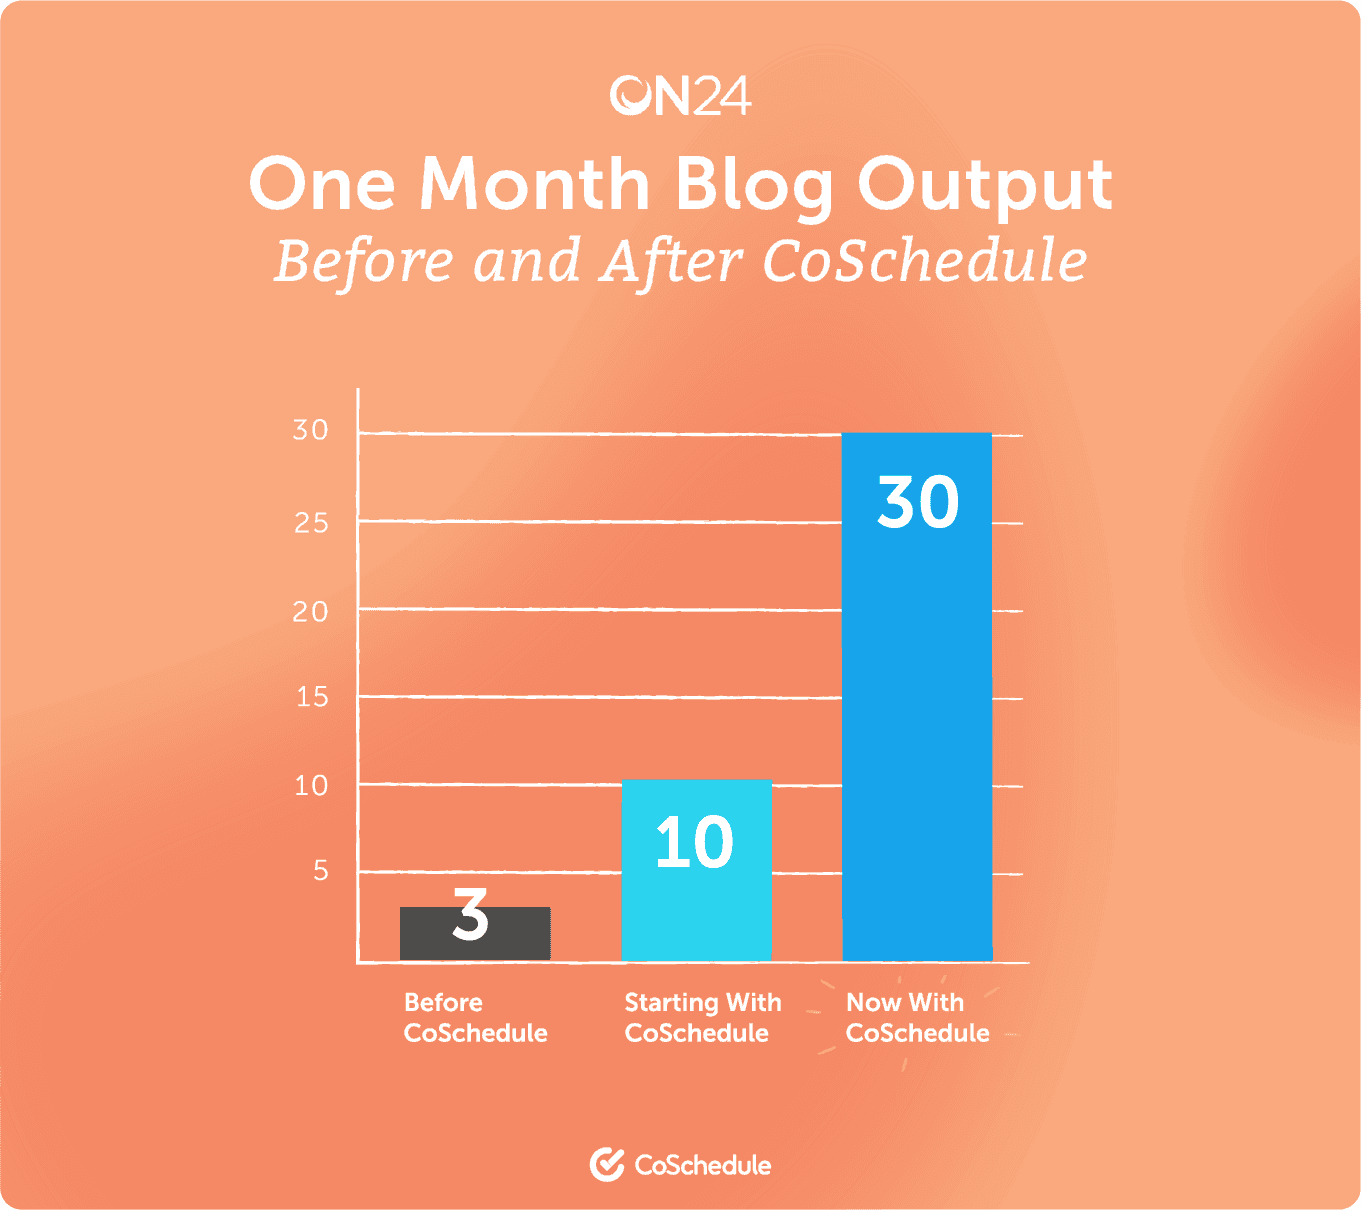 ON24 one month blog output before and after CoSchedule bar graph